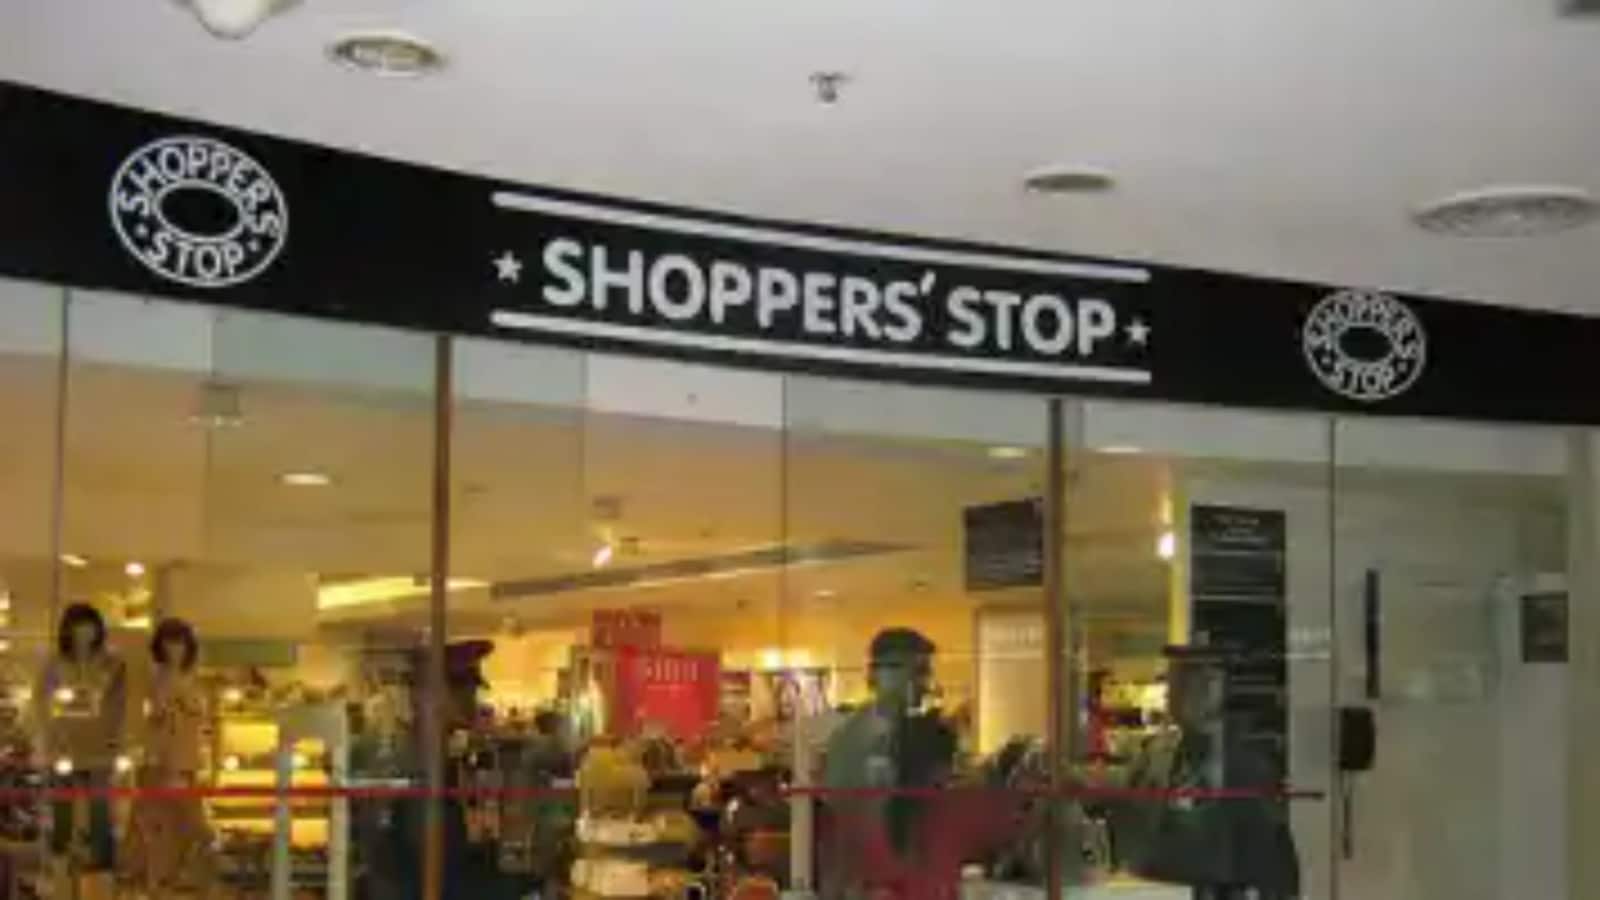 Up to 80% of our sales originate online, says Shoppers Stop MD